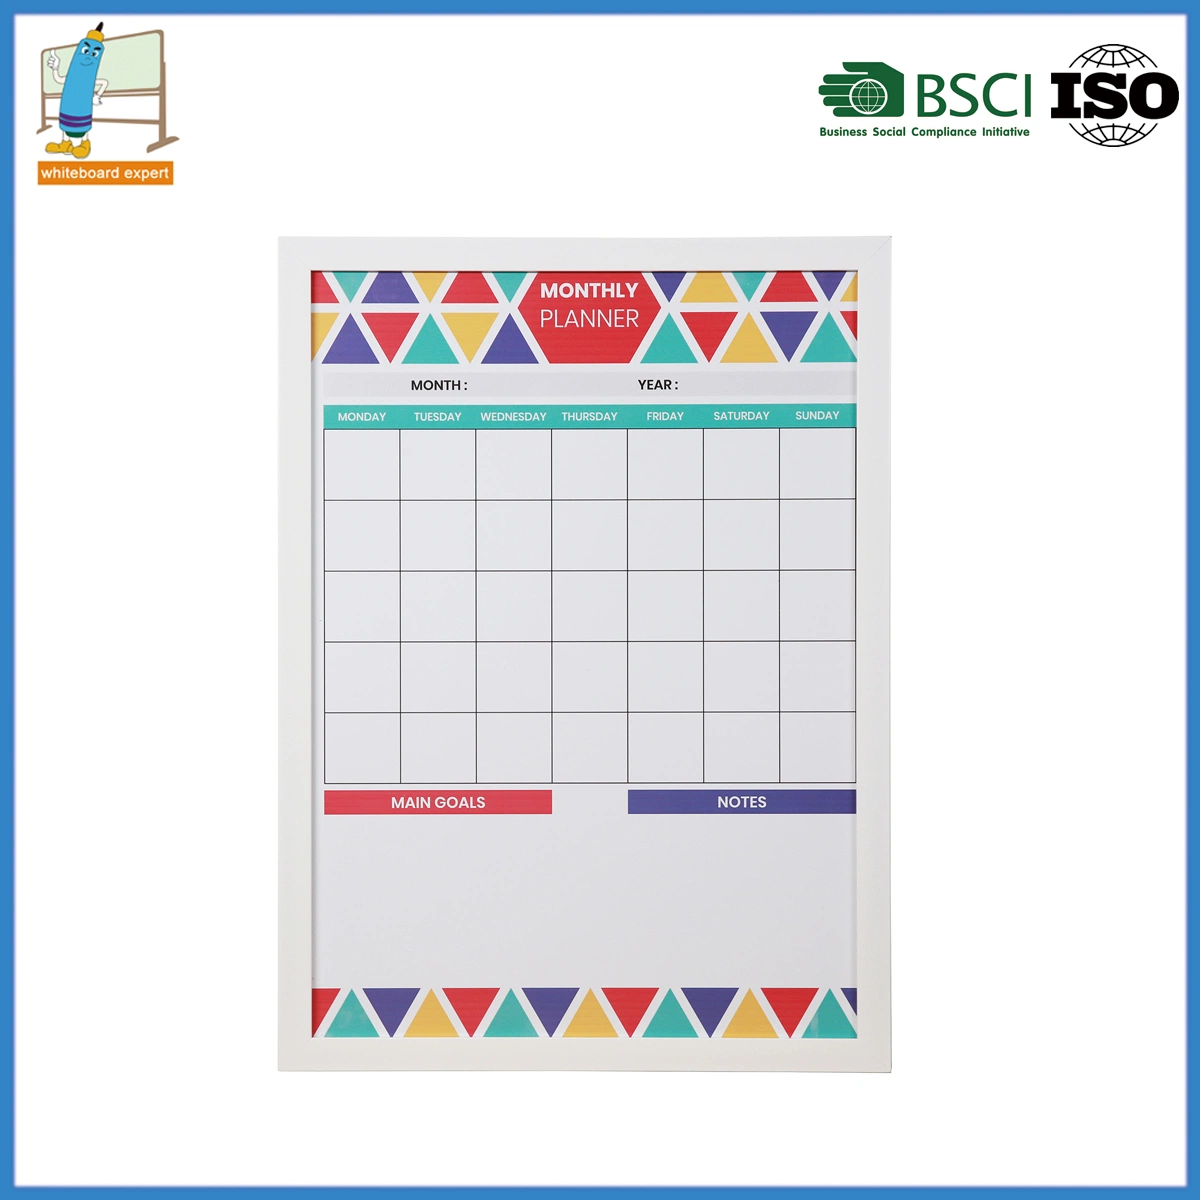 Magnetic Calendar Whiteboard 48" X 36" - Monthly Calendar Dry Erase Board, White Board + Colorful Calendar Board